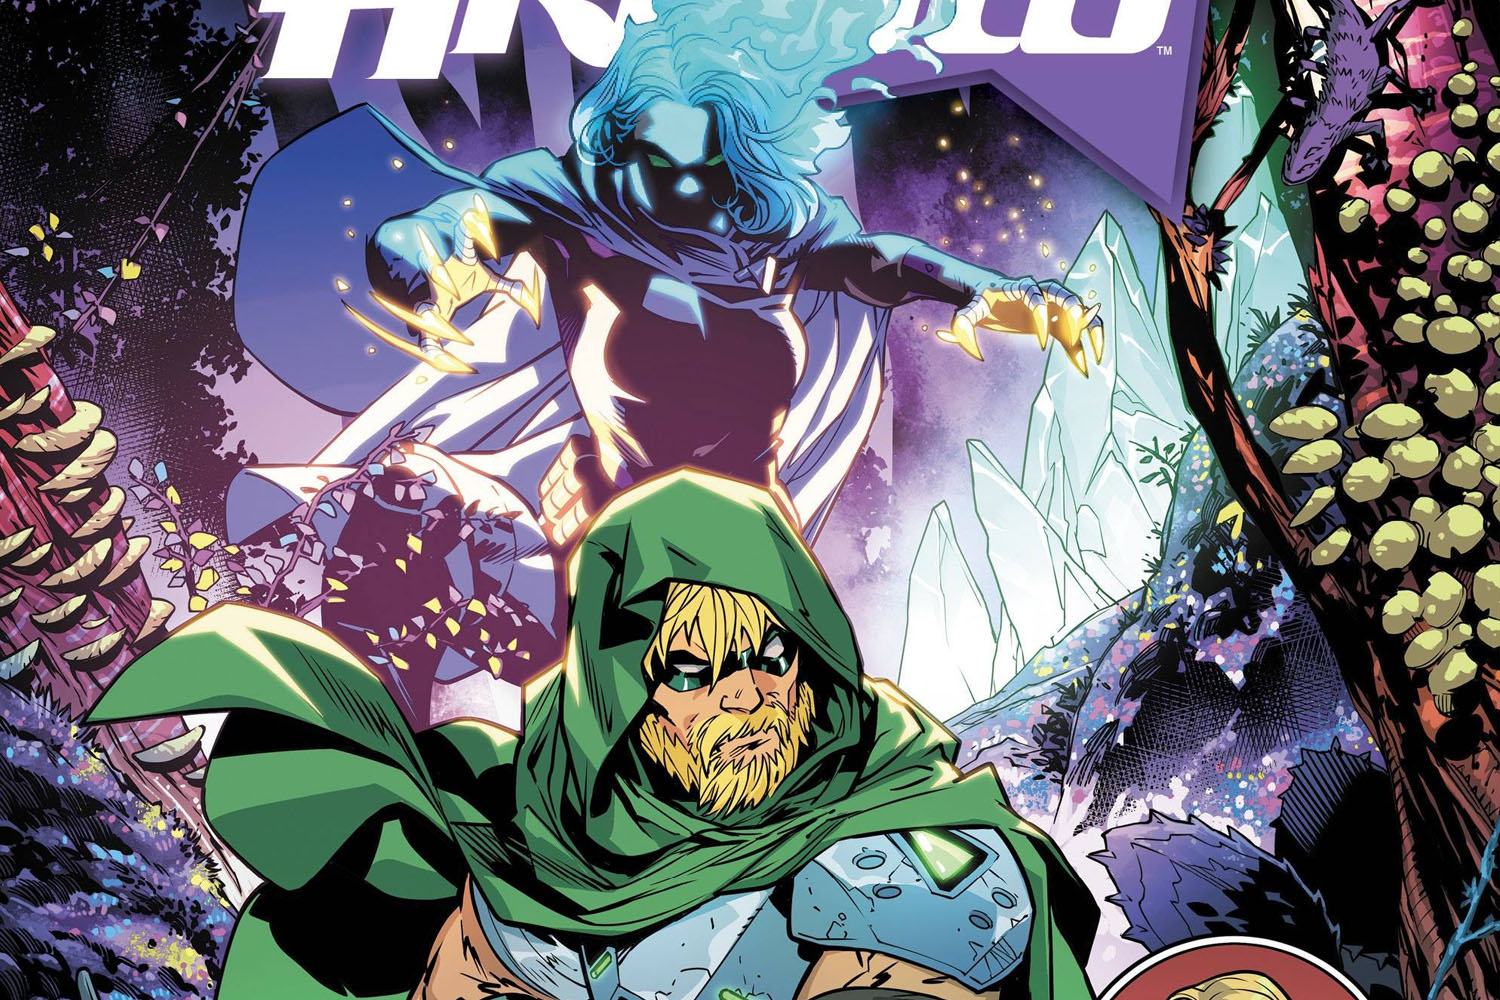 'Green Arrow' #2 continues the momentum with another great issue